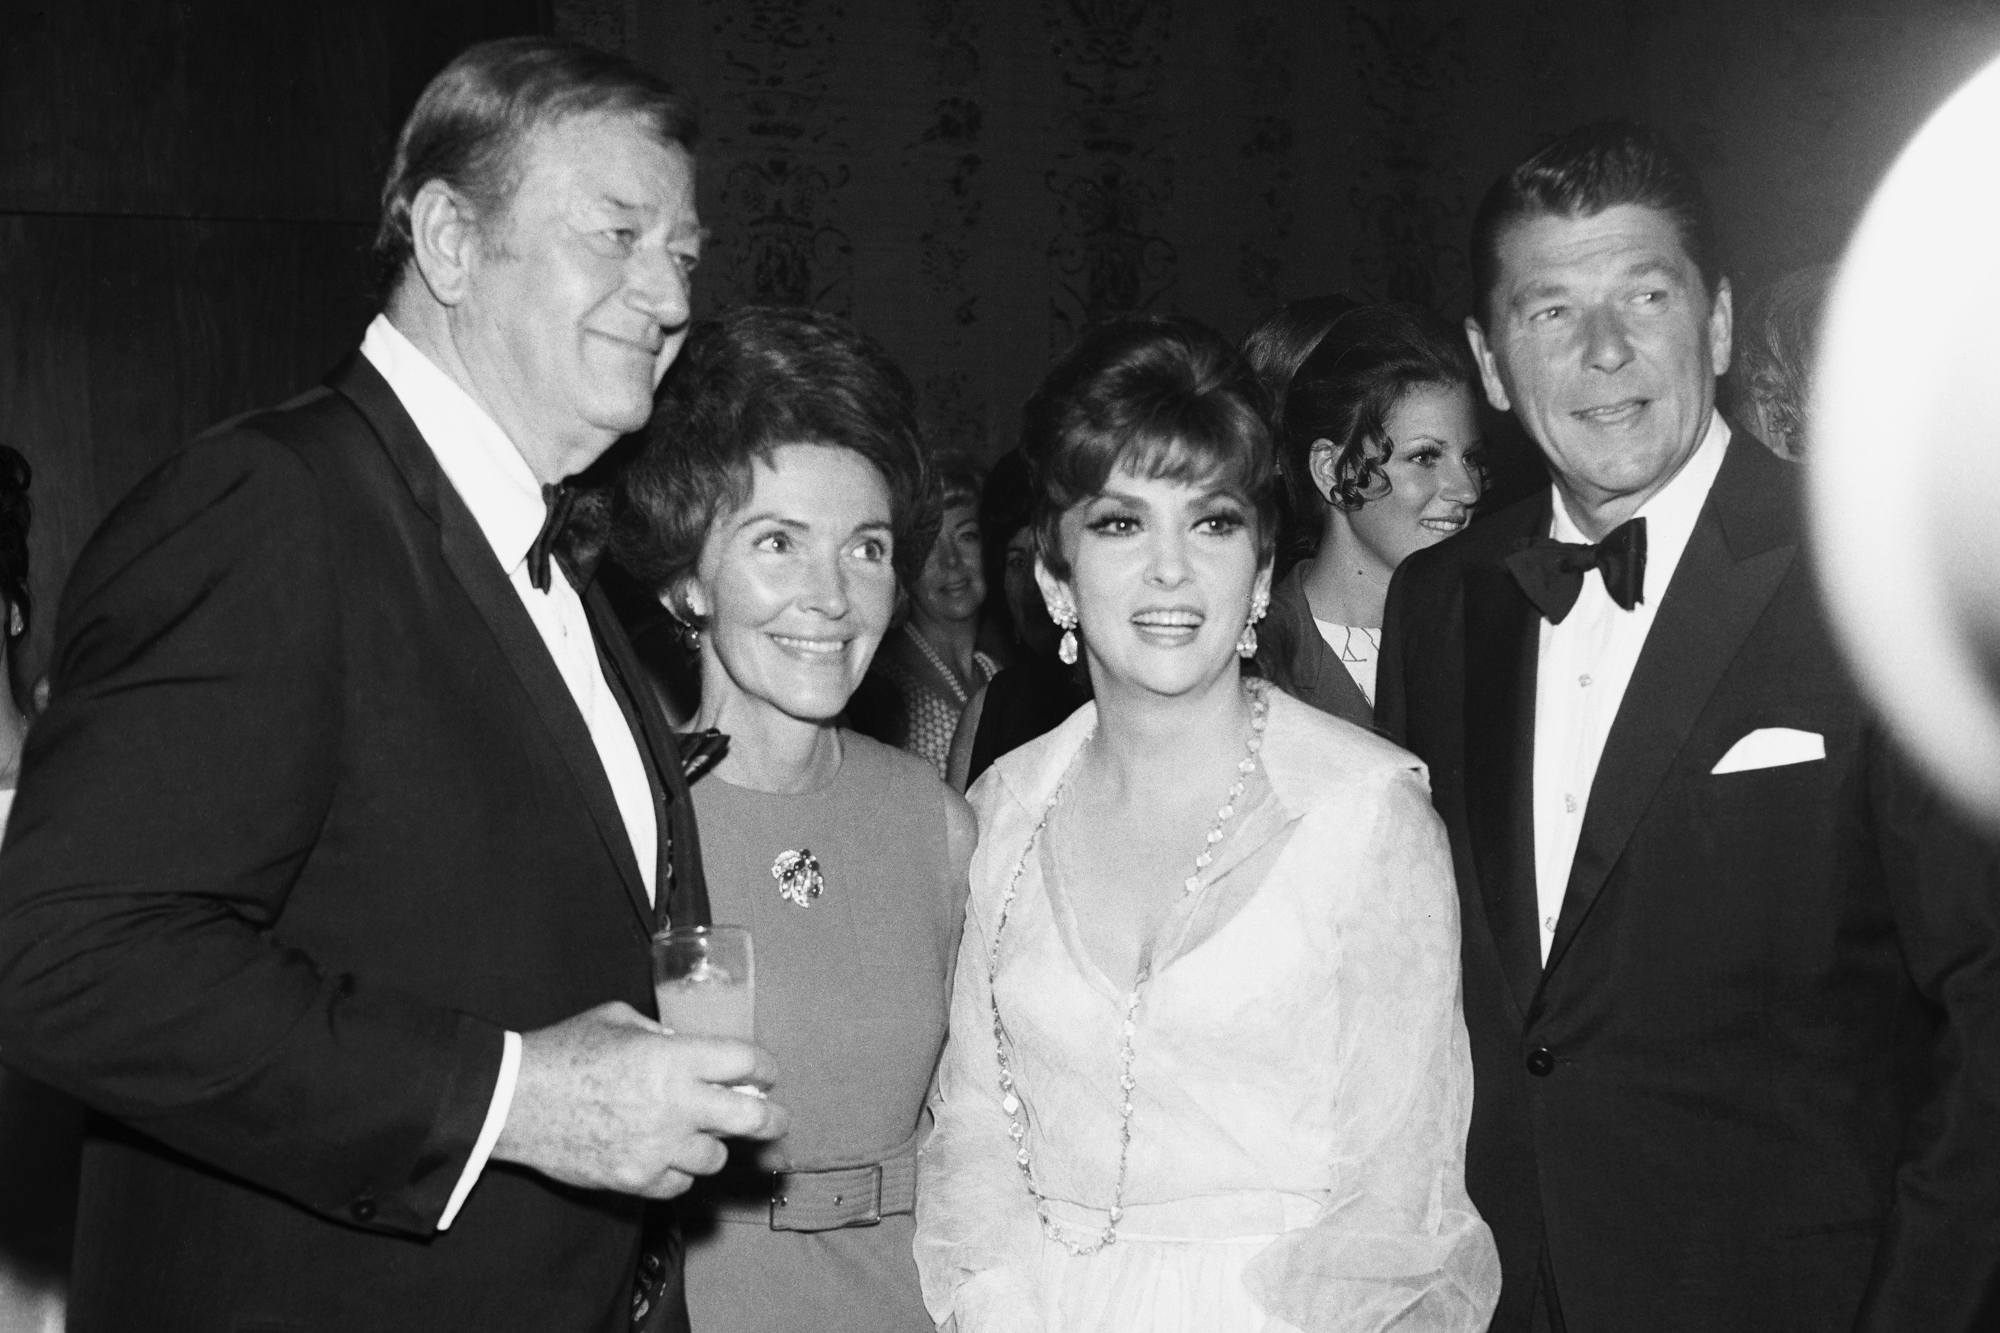 John Wayne, Nancy Reagan, Gina Lollobrigida, and Ronald Reagan in a black-and-white picture in suits and dresses during the National Headliner Awards